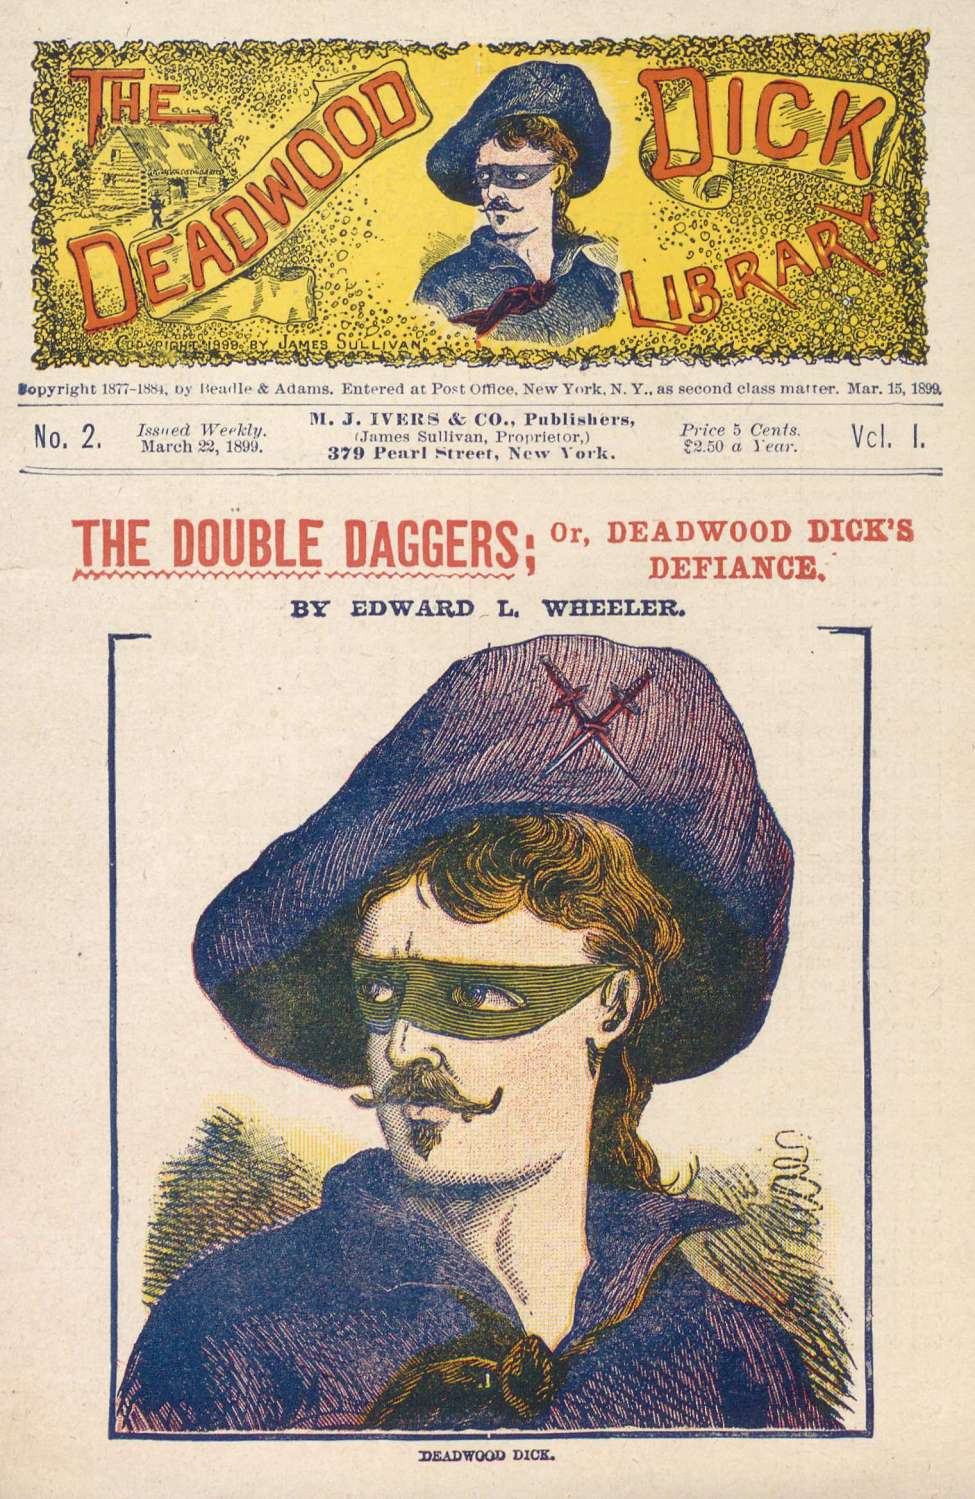 Book Cover For Deadwood Dick Library v1 2 - The Double Daggers